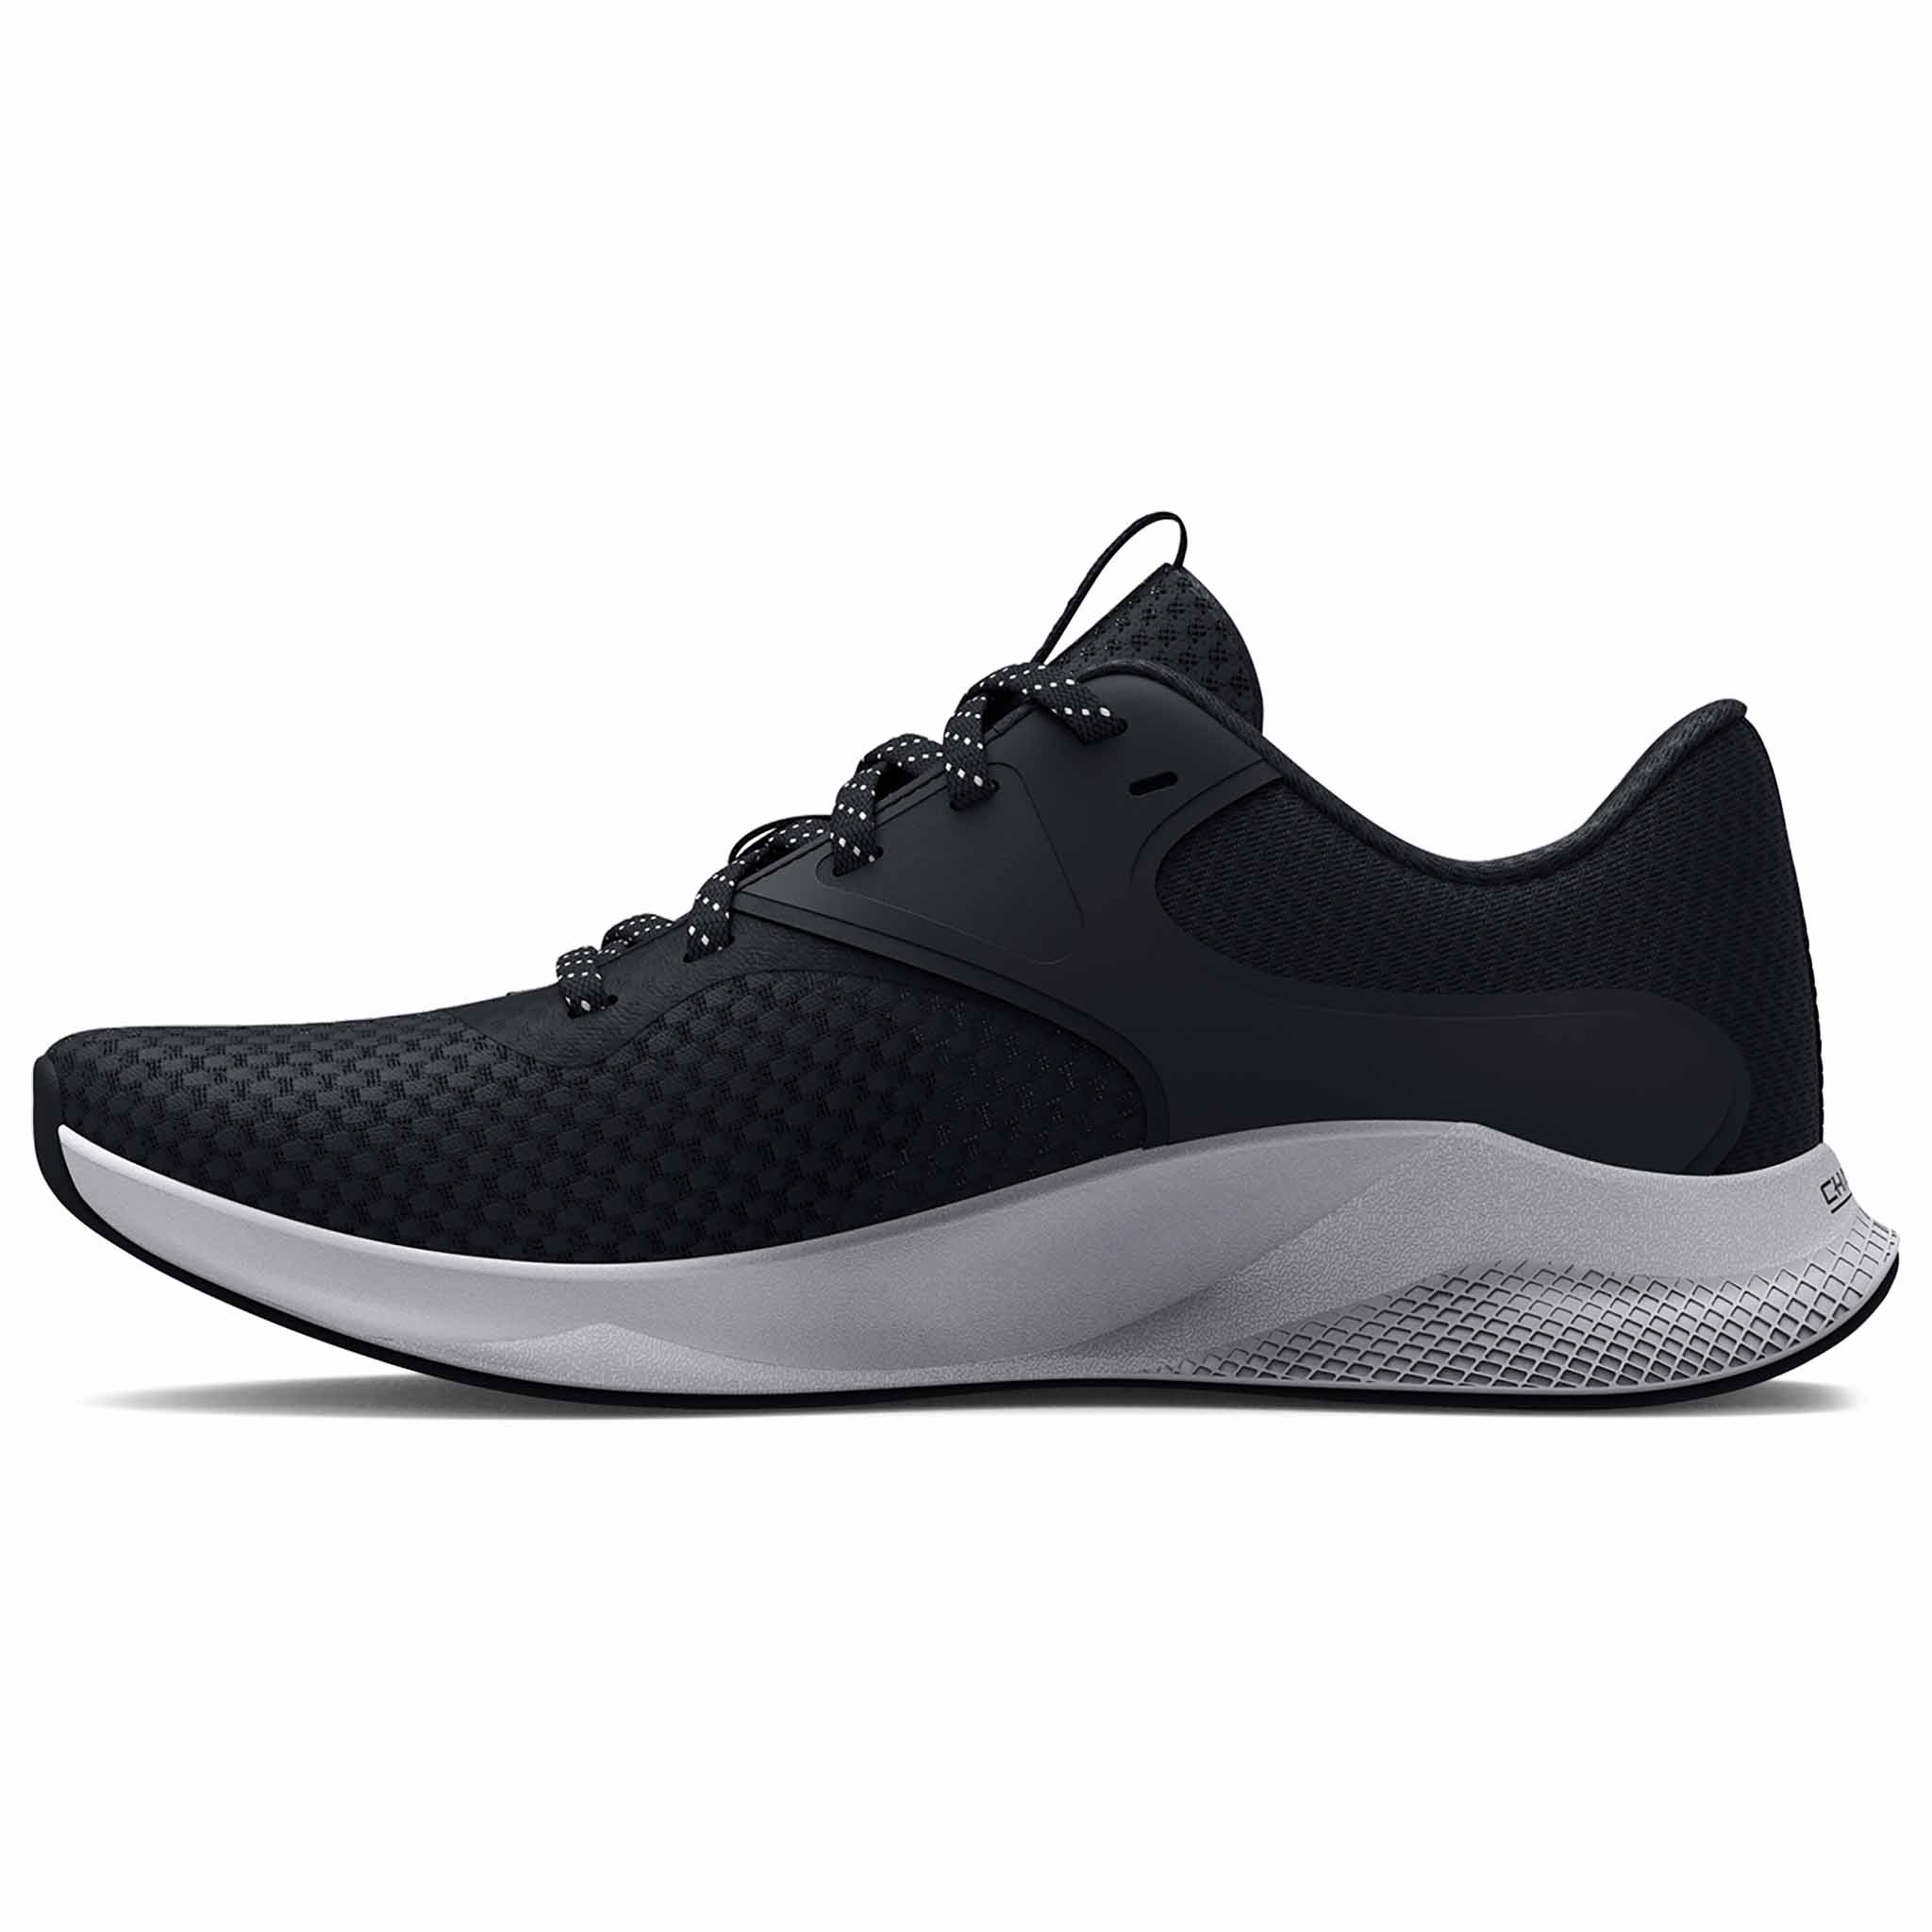 Under Armour Black Solid Athletic Shoes for Women for sale